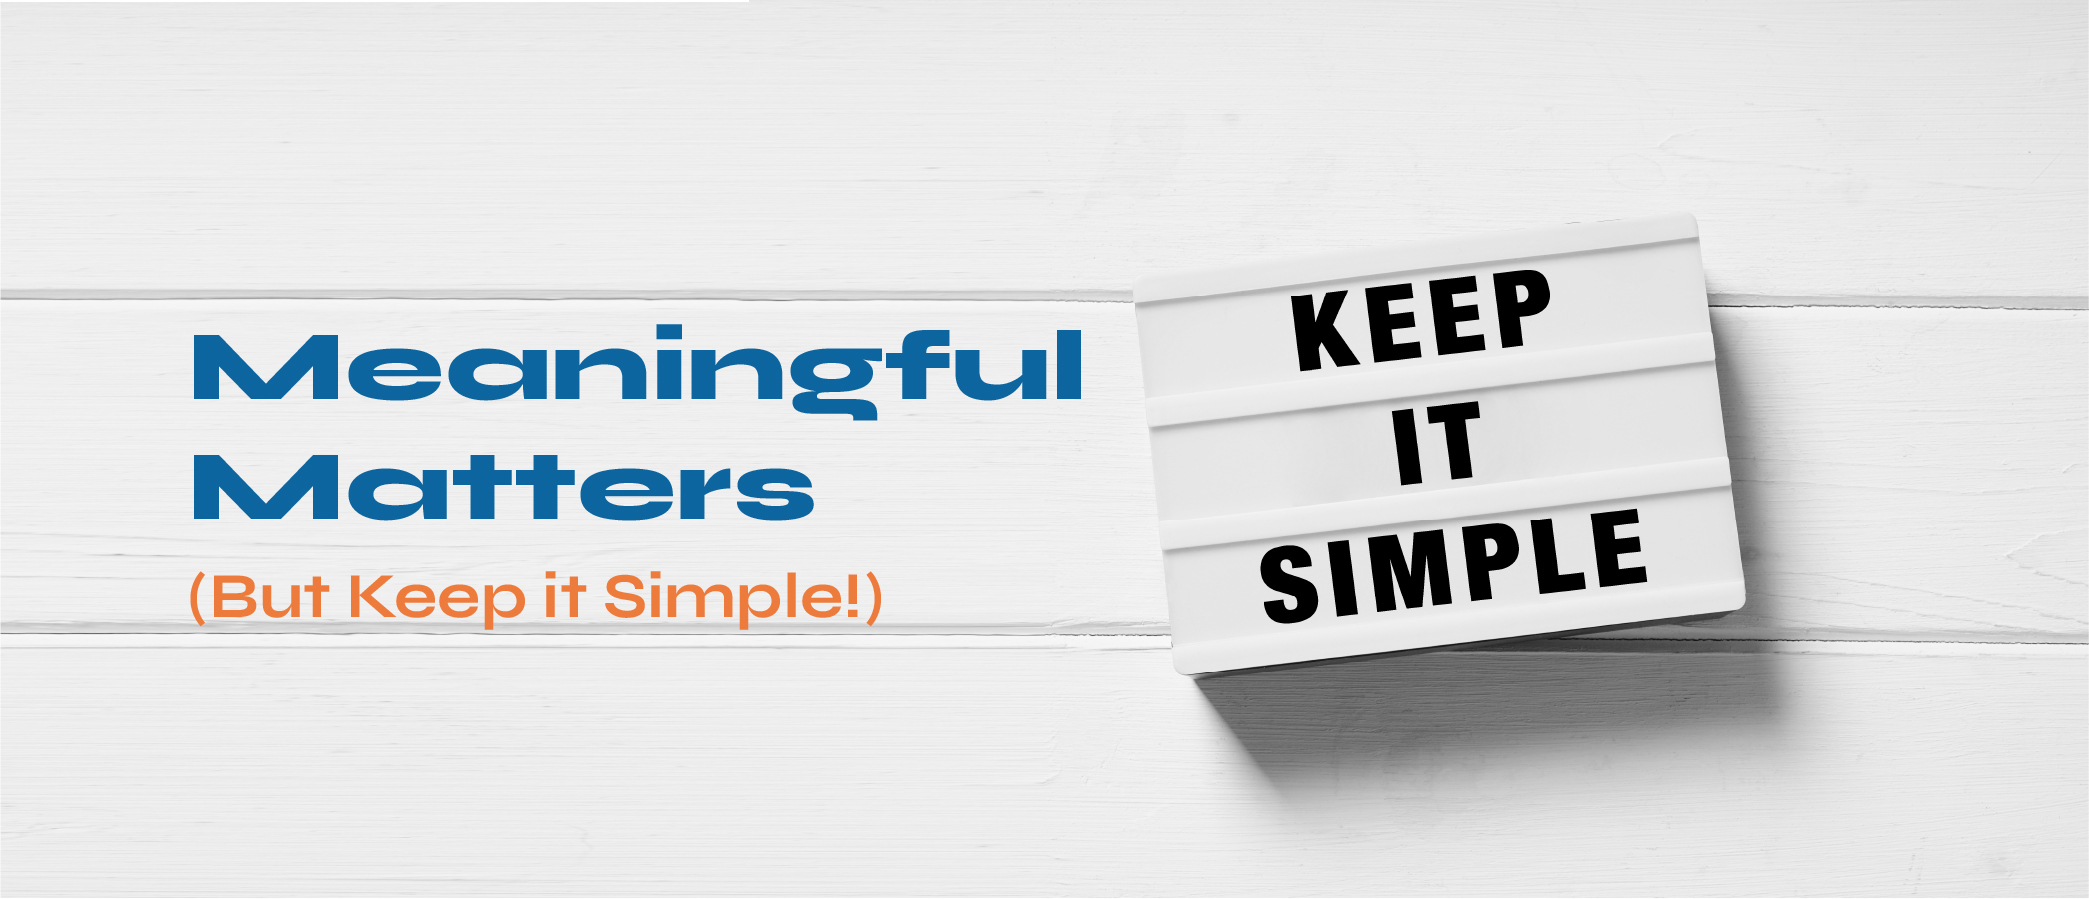 Meaningful Matters (But Keep it Simple!)